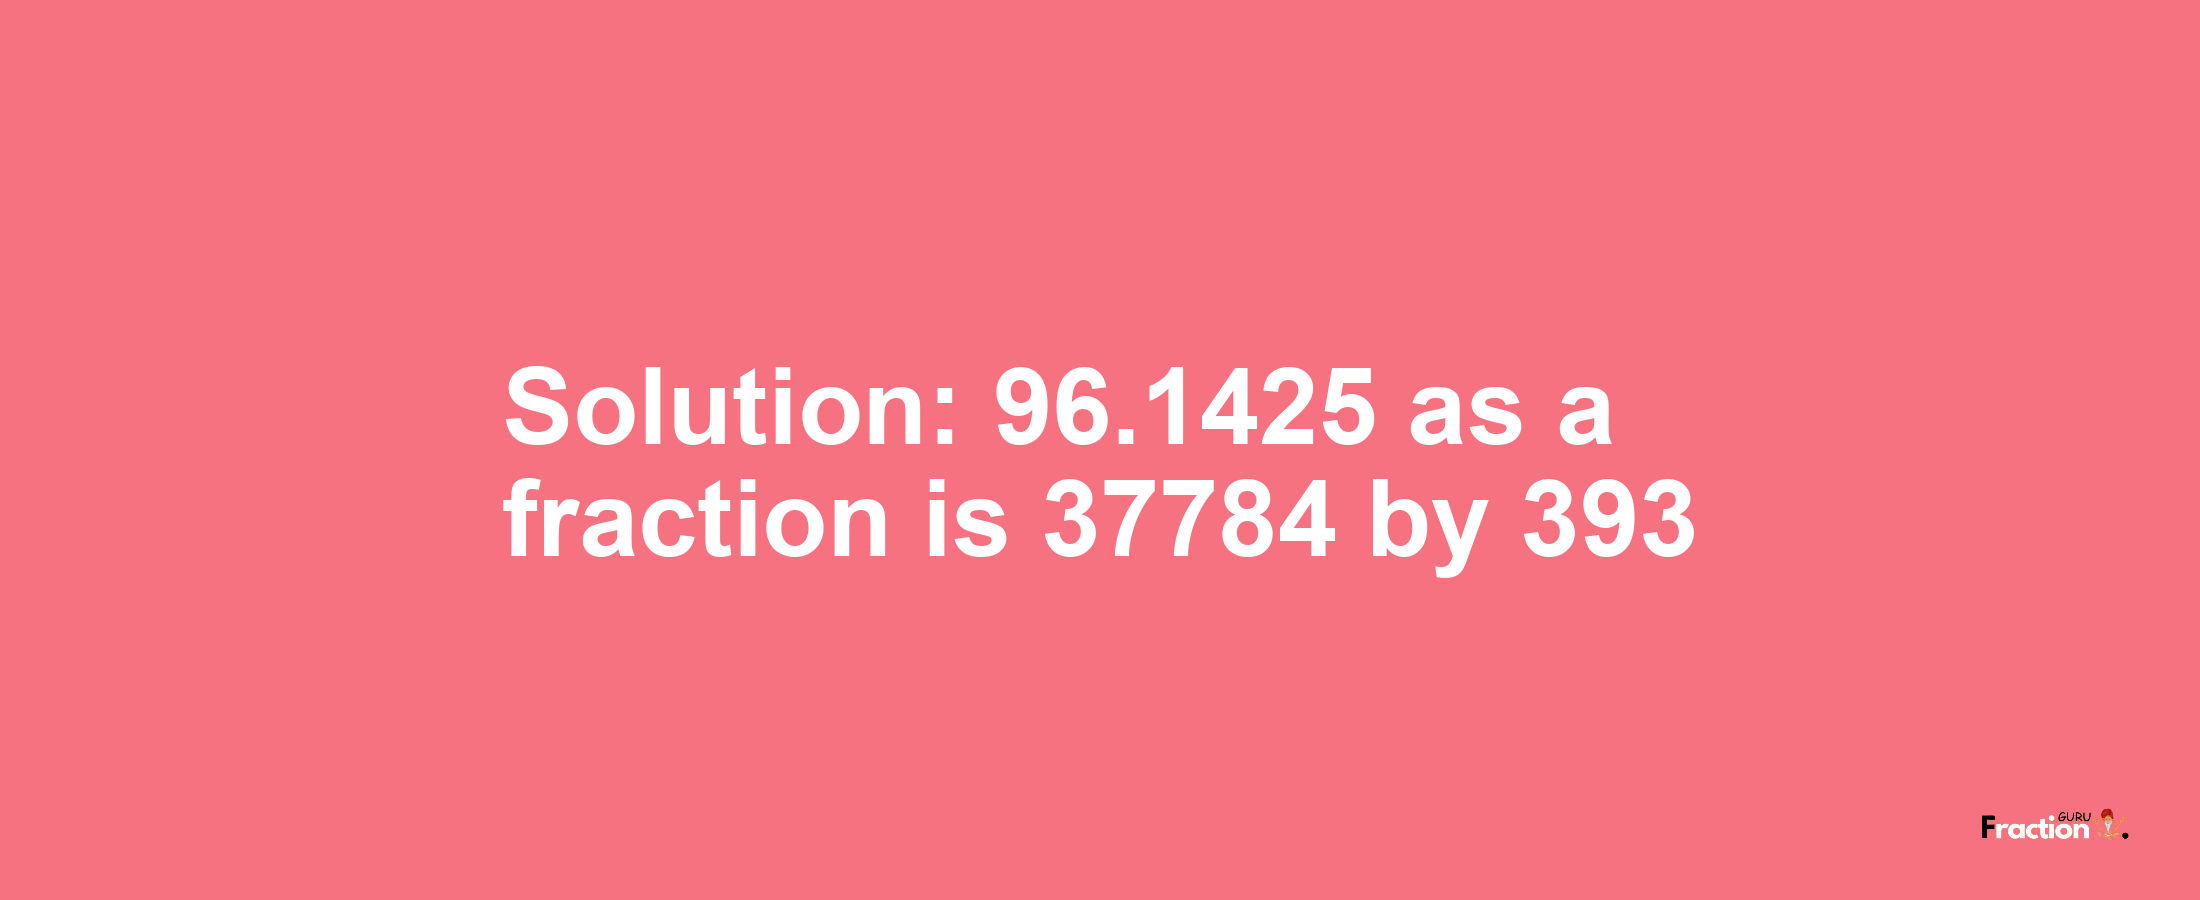 Solution:96.1425 as a fraction is 37784/393